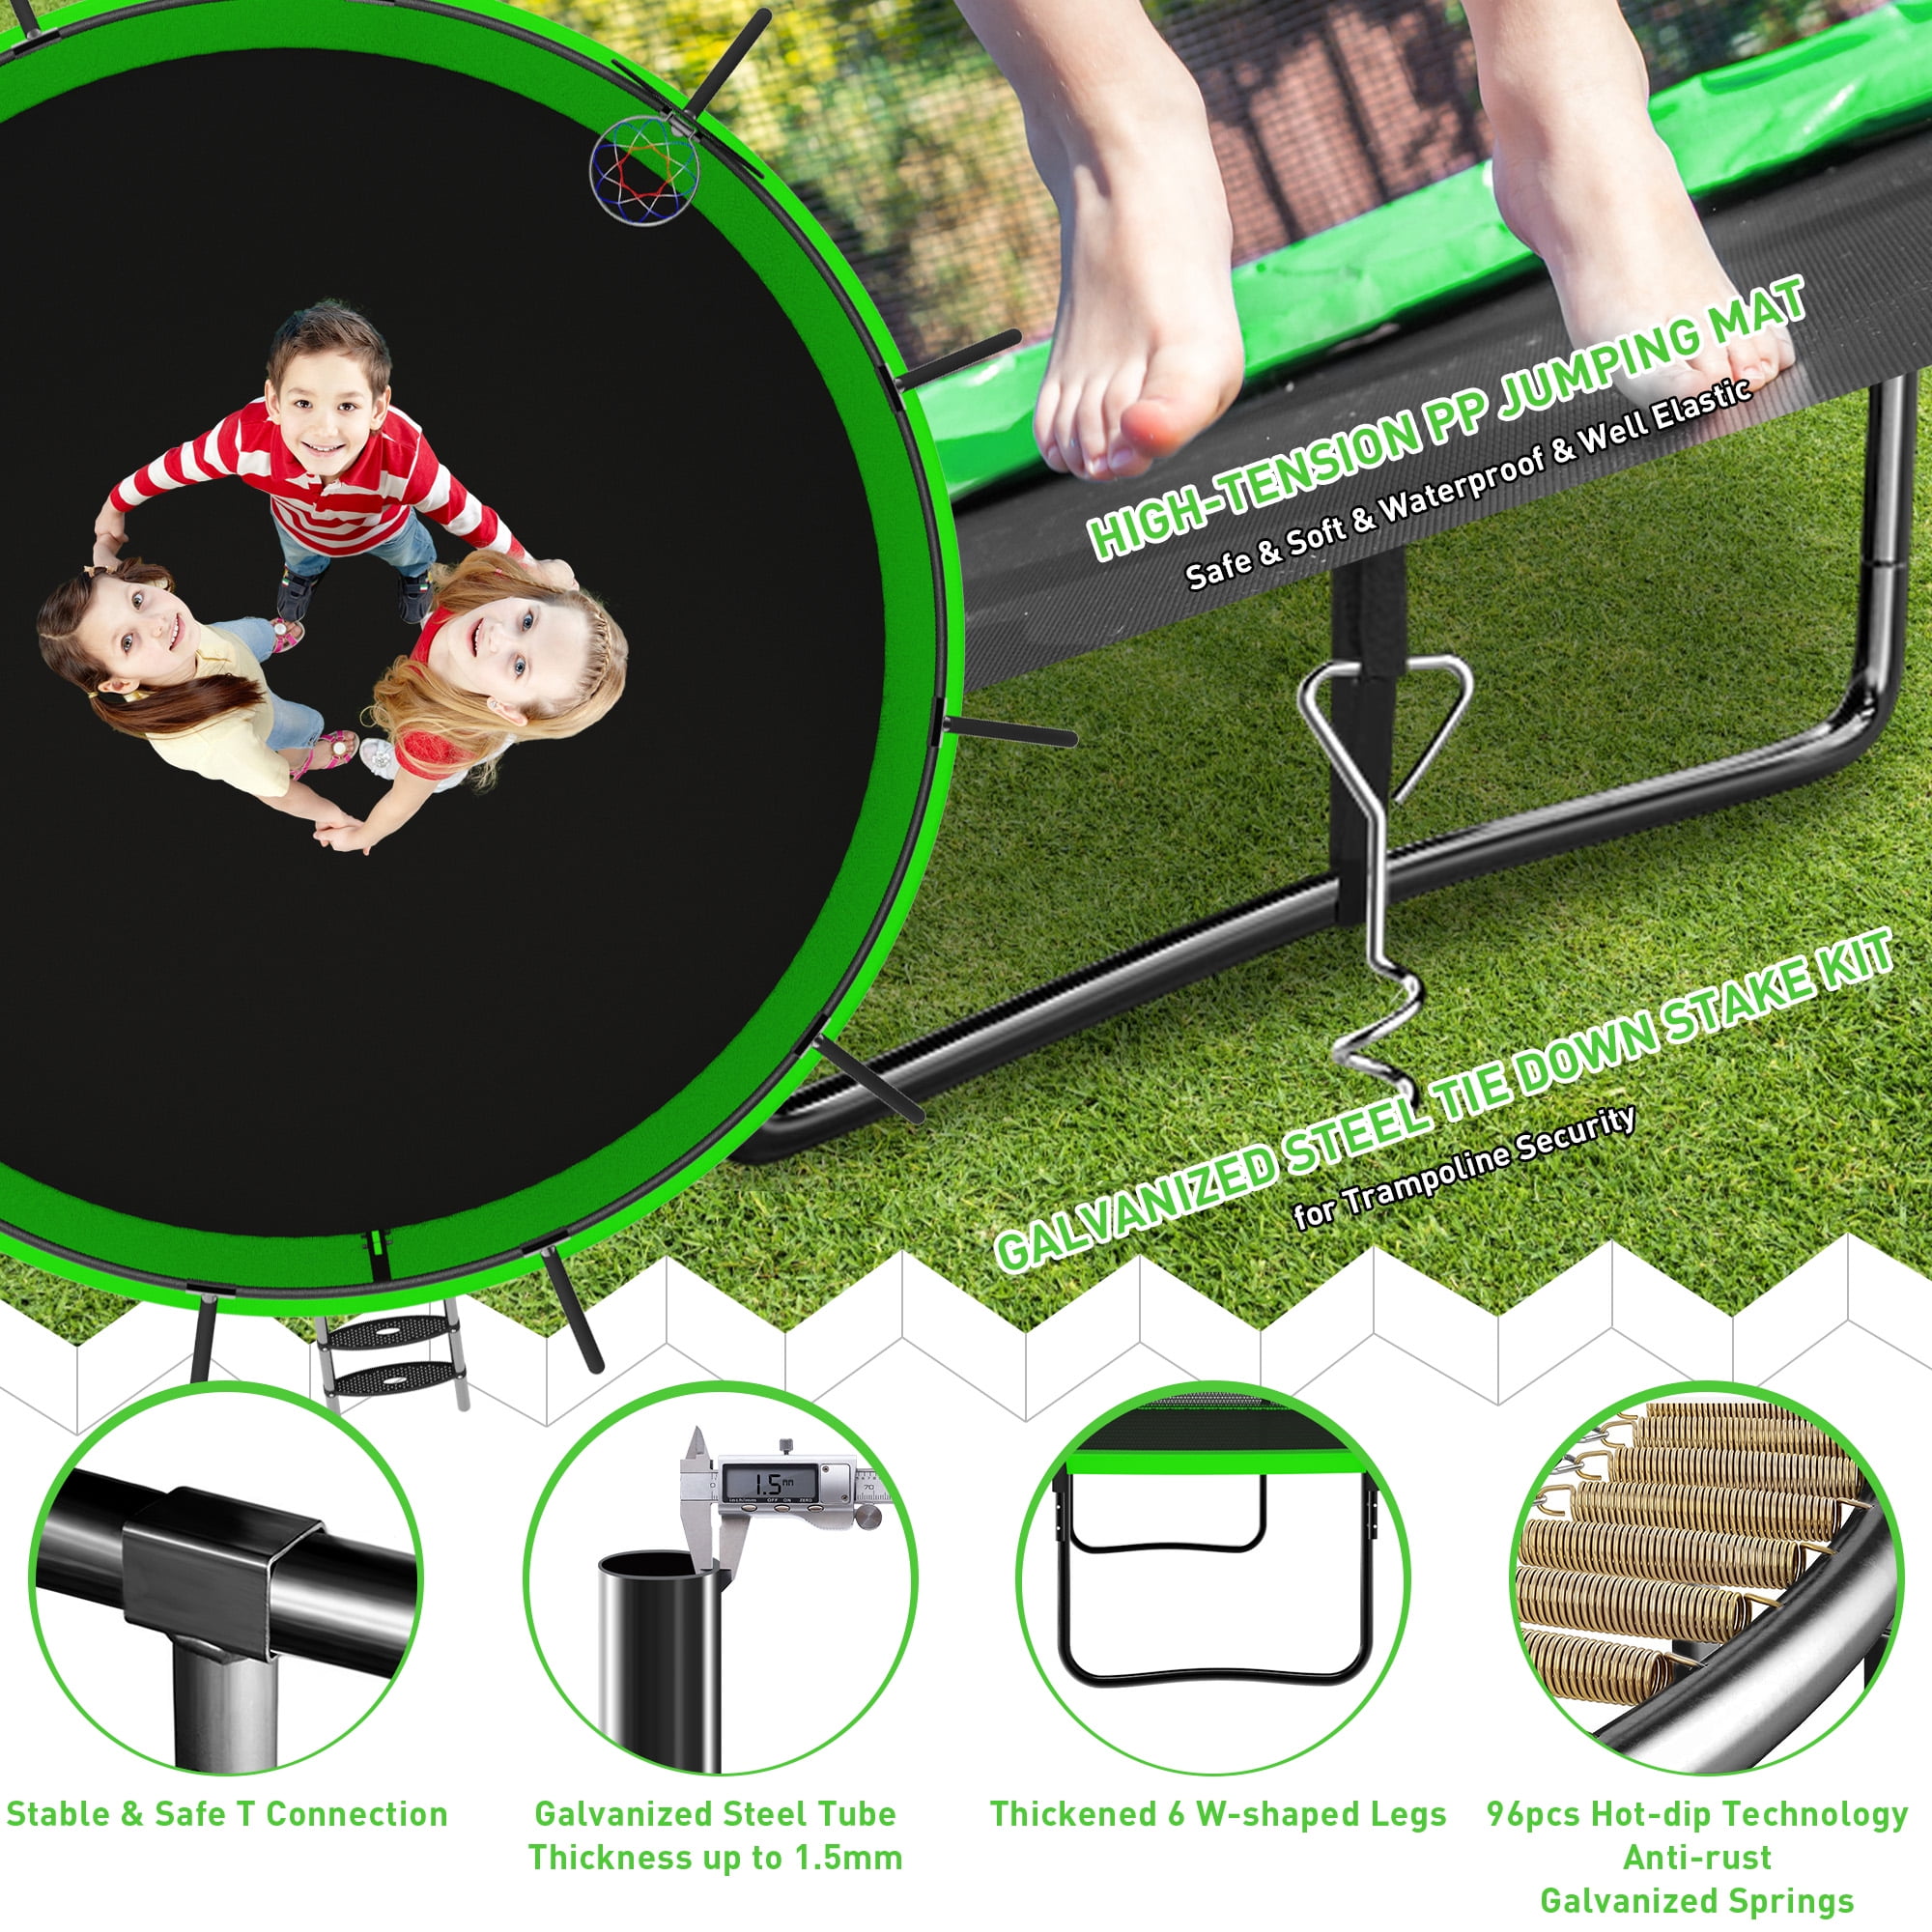 DreamBuck Trampoline 12FT 15FT 16FT for Kids and Adults, Pumpkin Trampoline with Basketball Hoop, Enclosure and Ladder, ASTM Approved, Green - Walmart.com